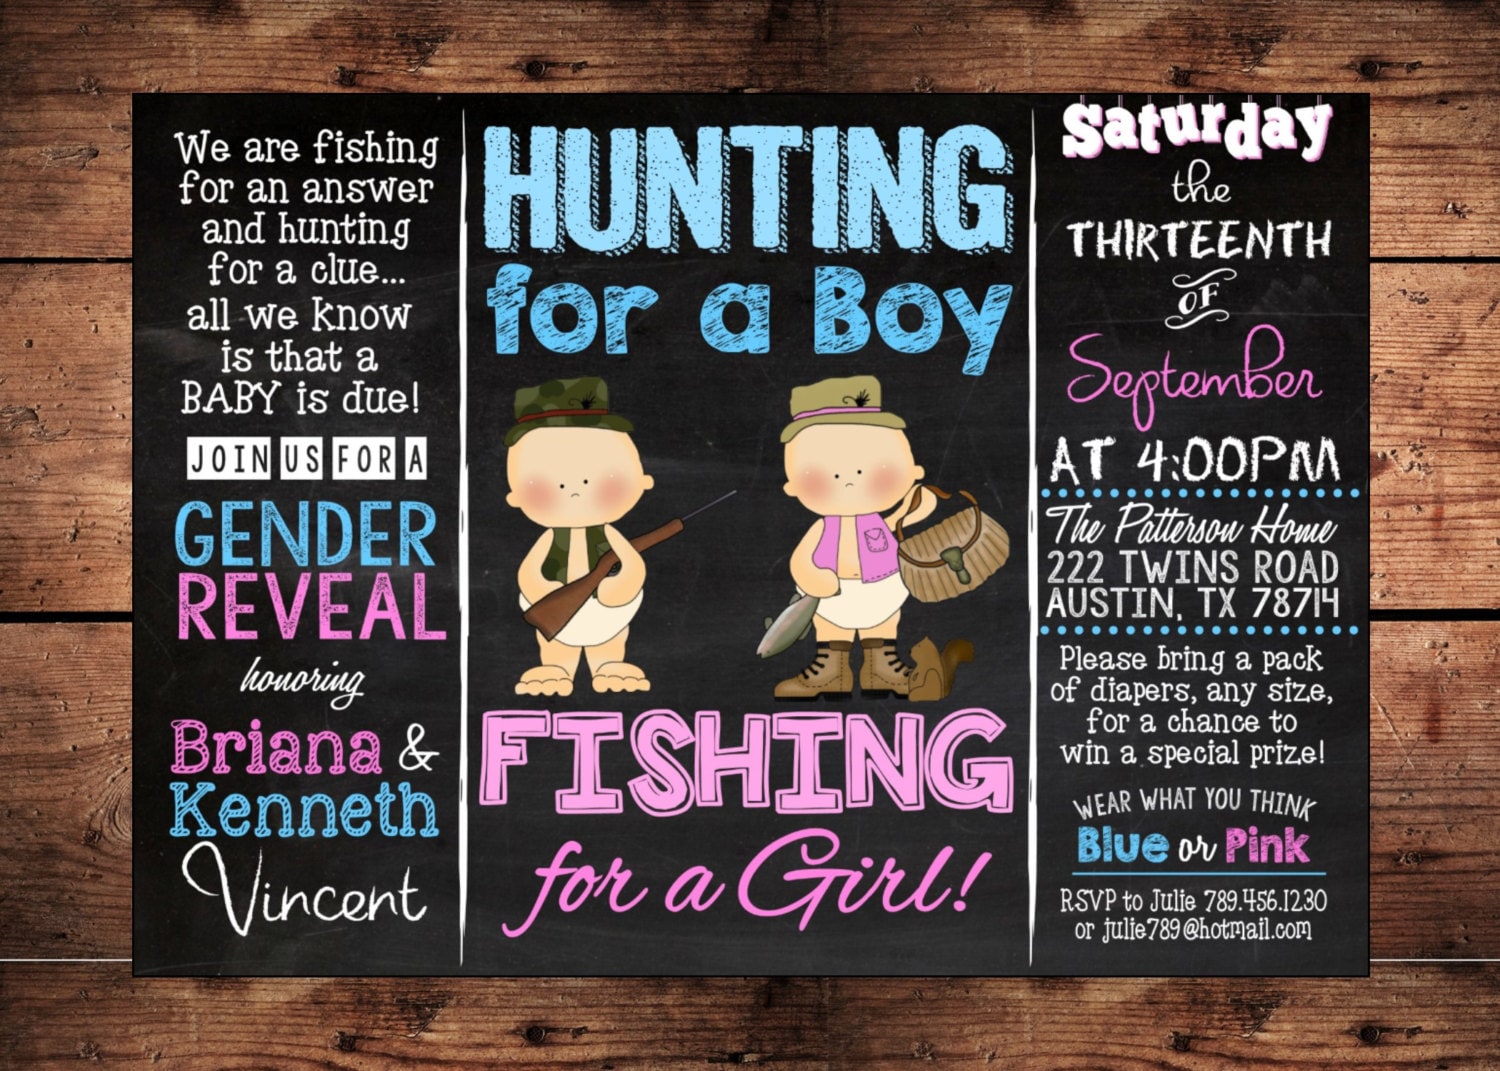 THE ORIGINAL Hunting for a Boy Fishing for a Girl Gender Reveal Invitation  - Digital